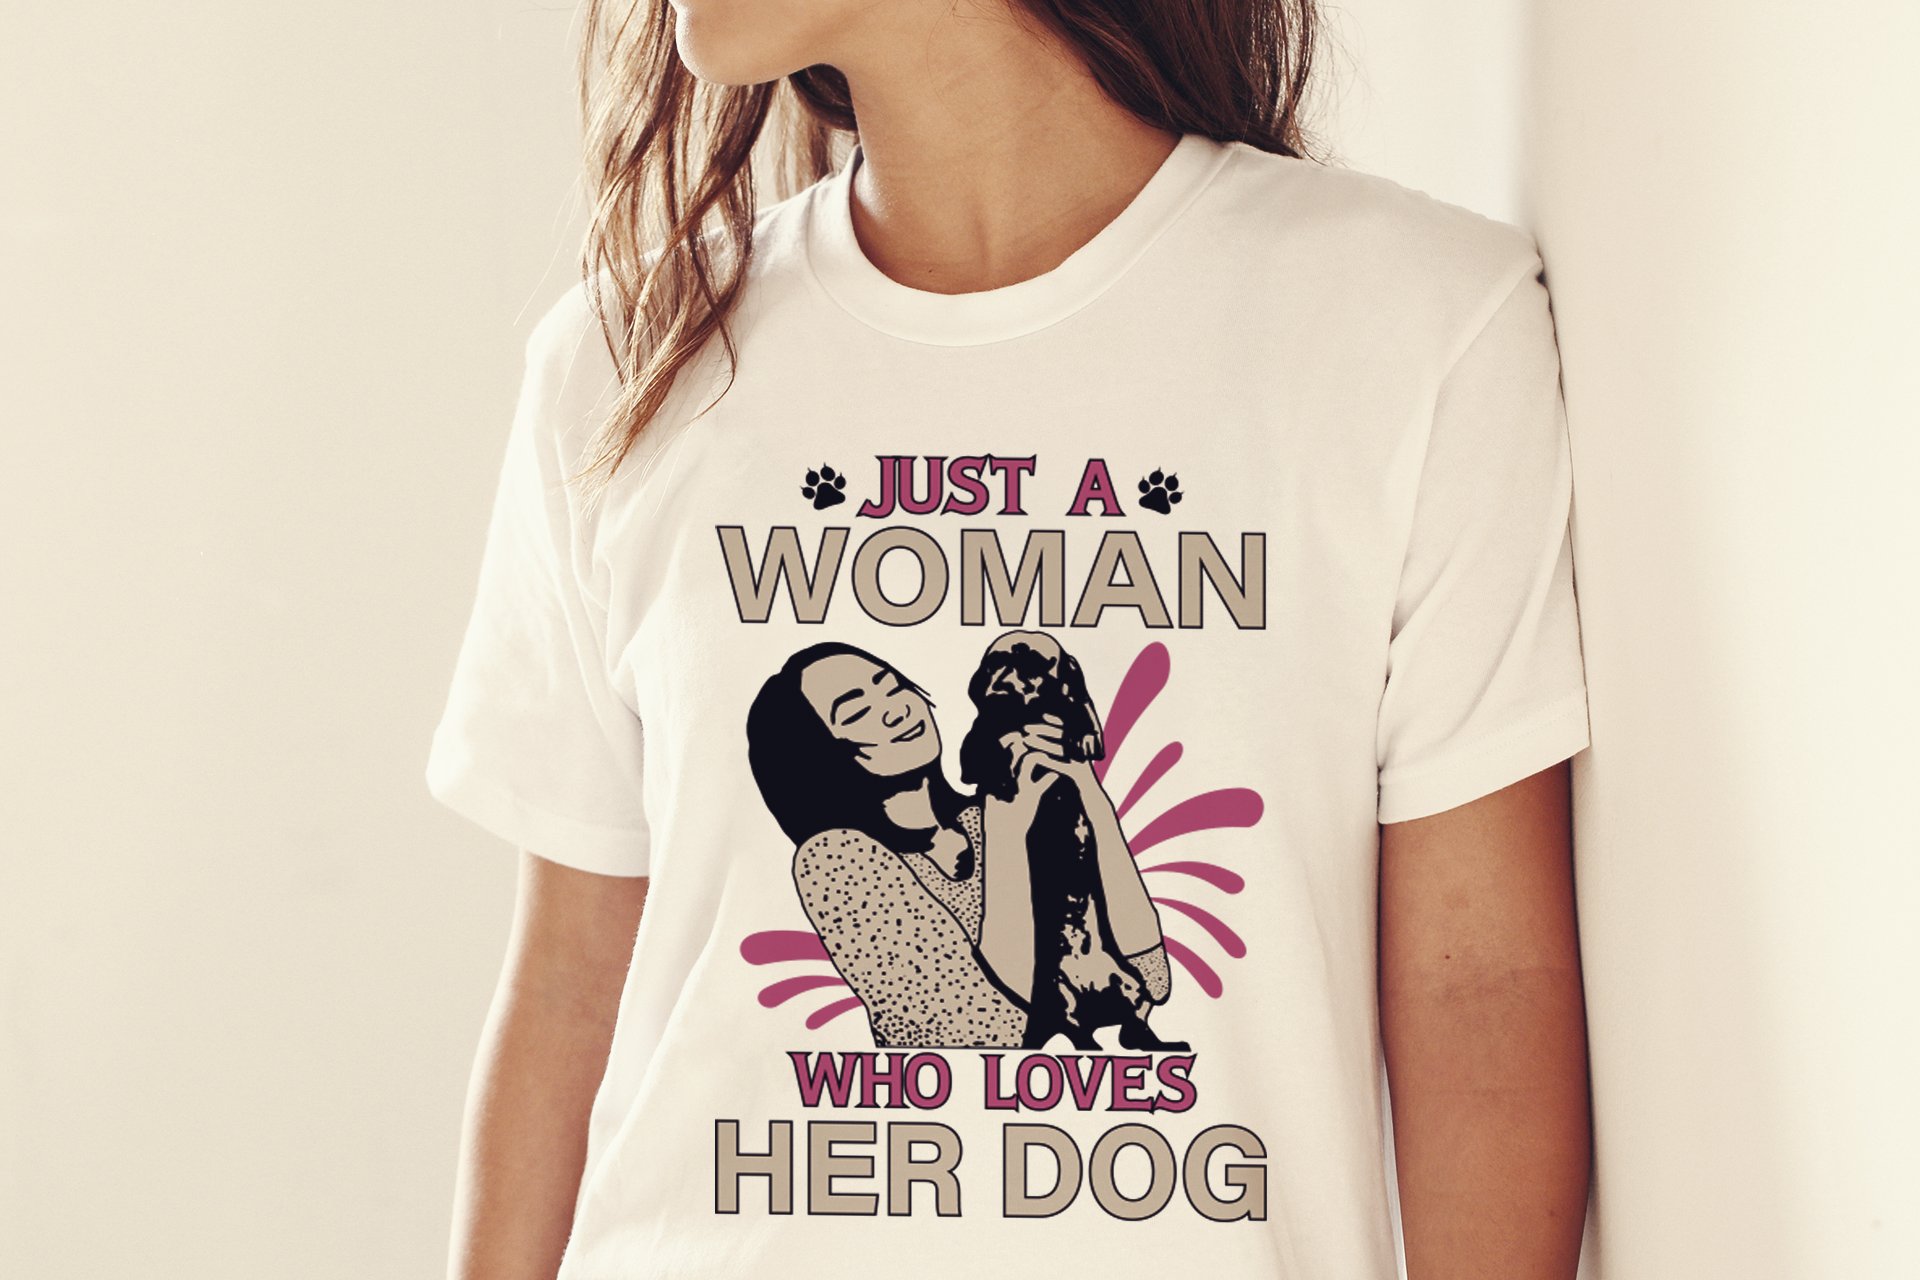 Perfect white t-shirt for a dog lover.